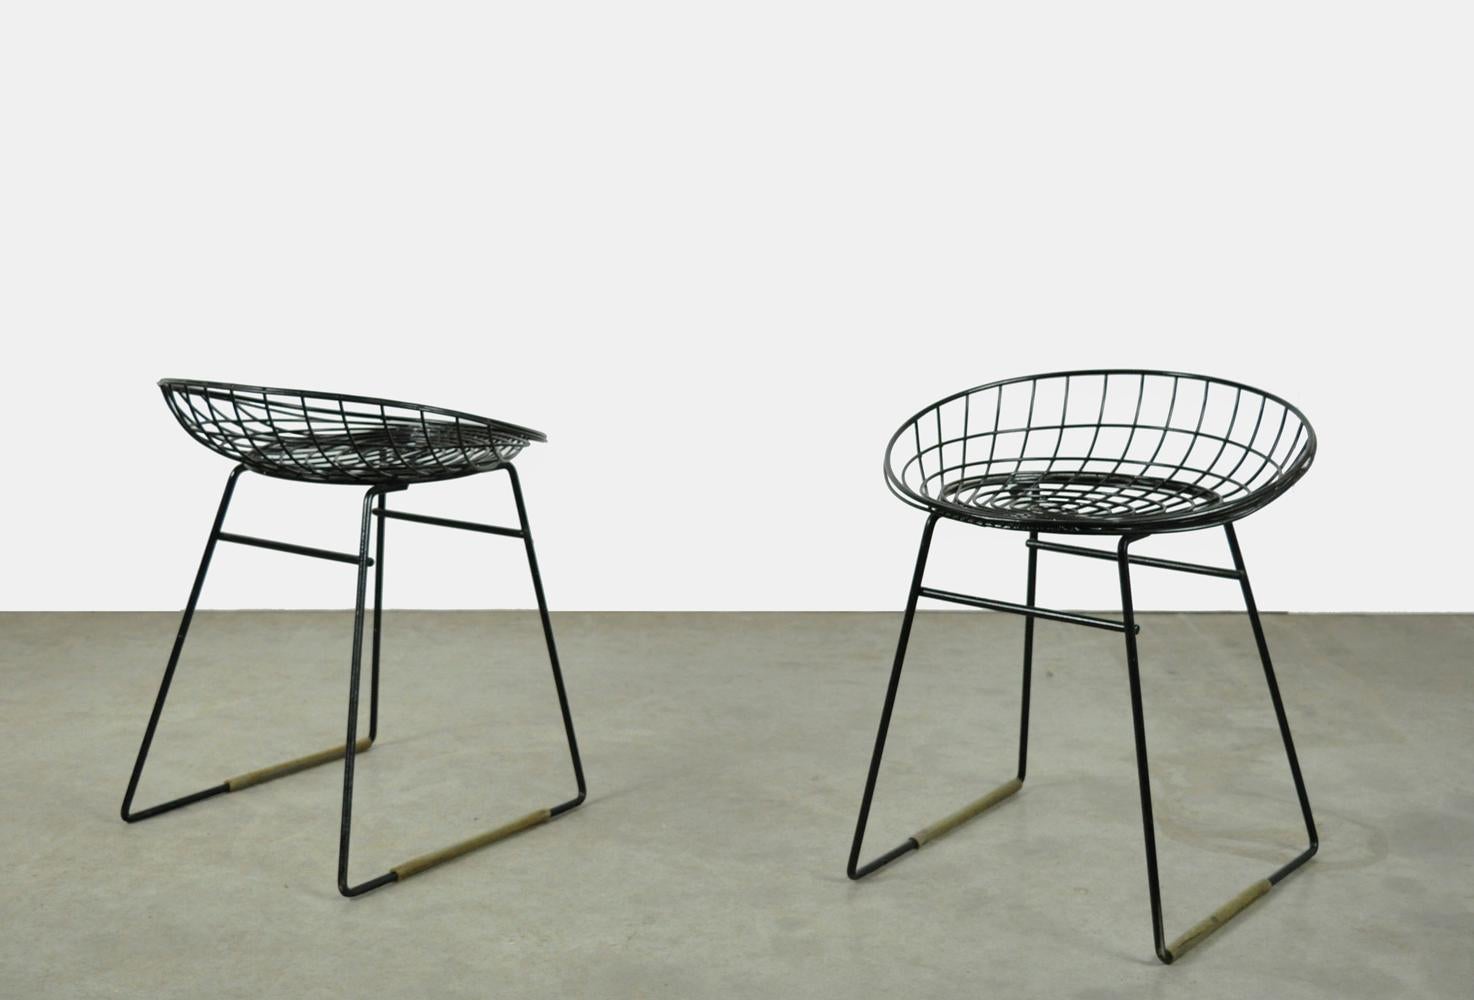 Dutch Set of two metal wire stools KM05 designed by Cees Braakman for Pastoe, 1950s For Sale